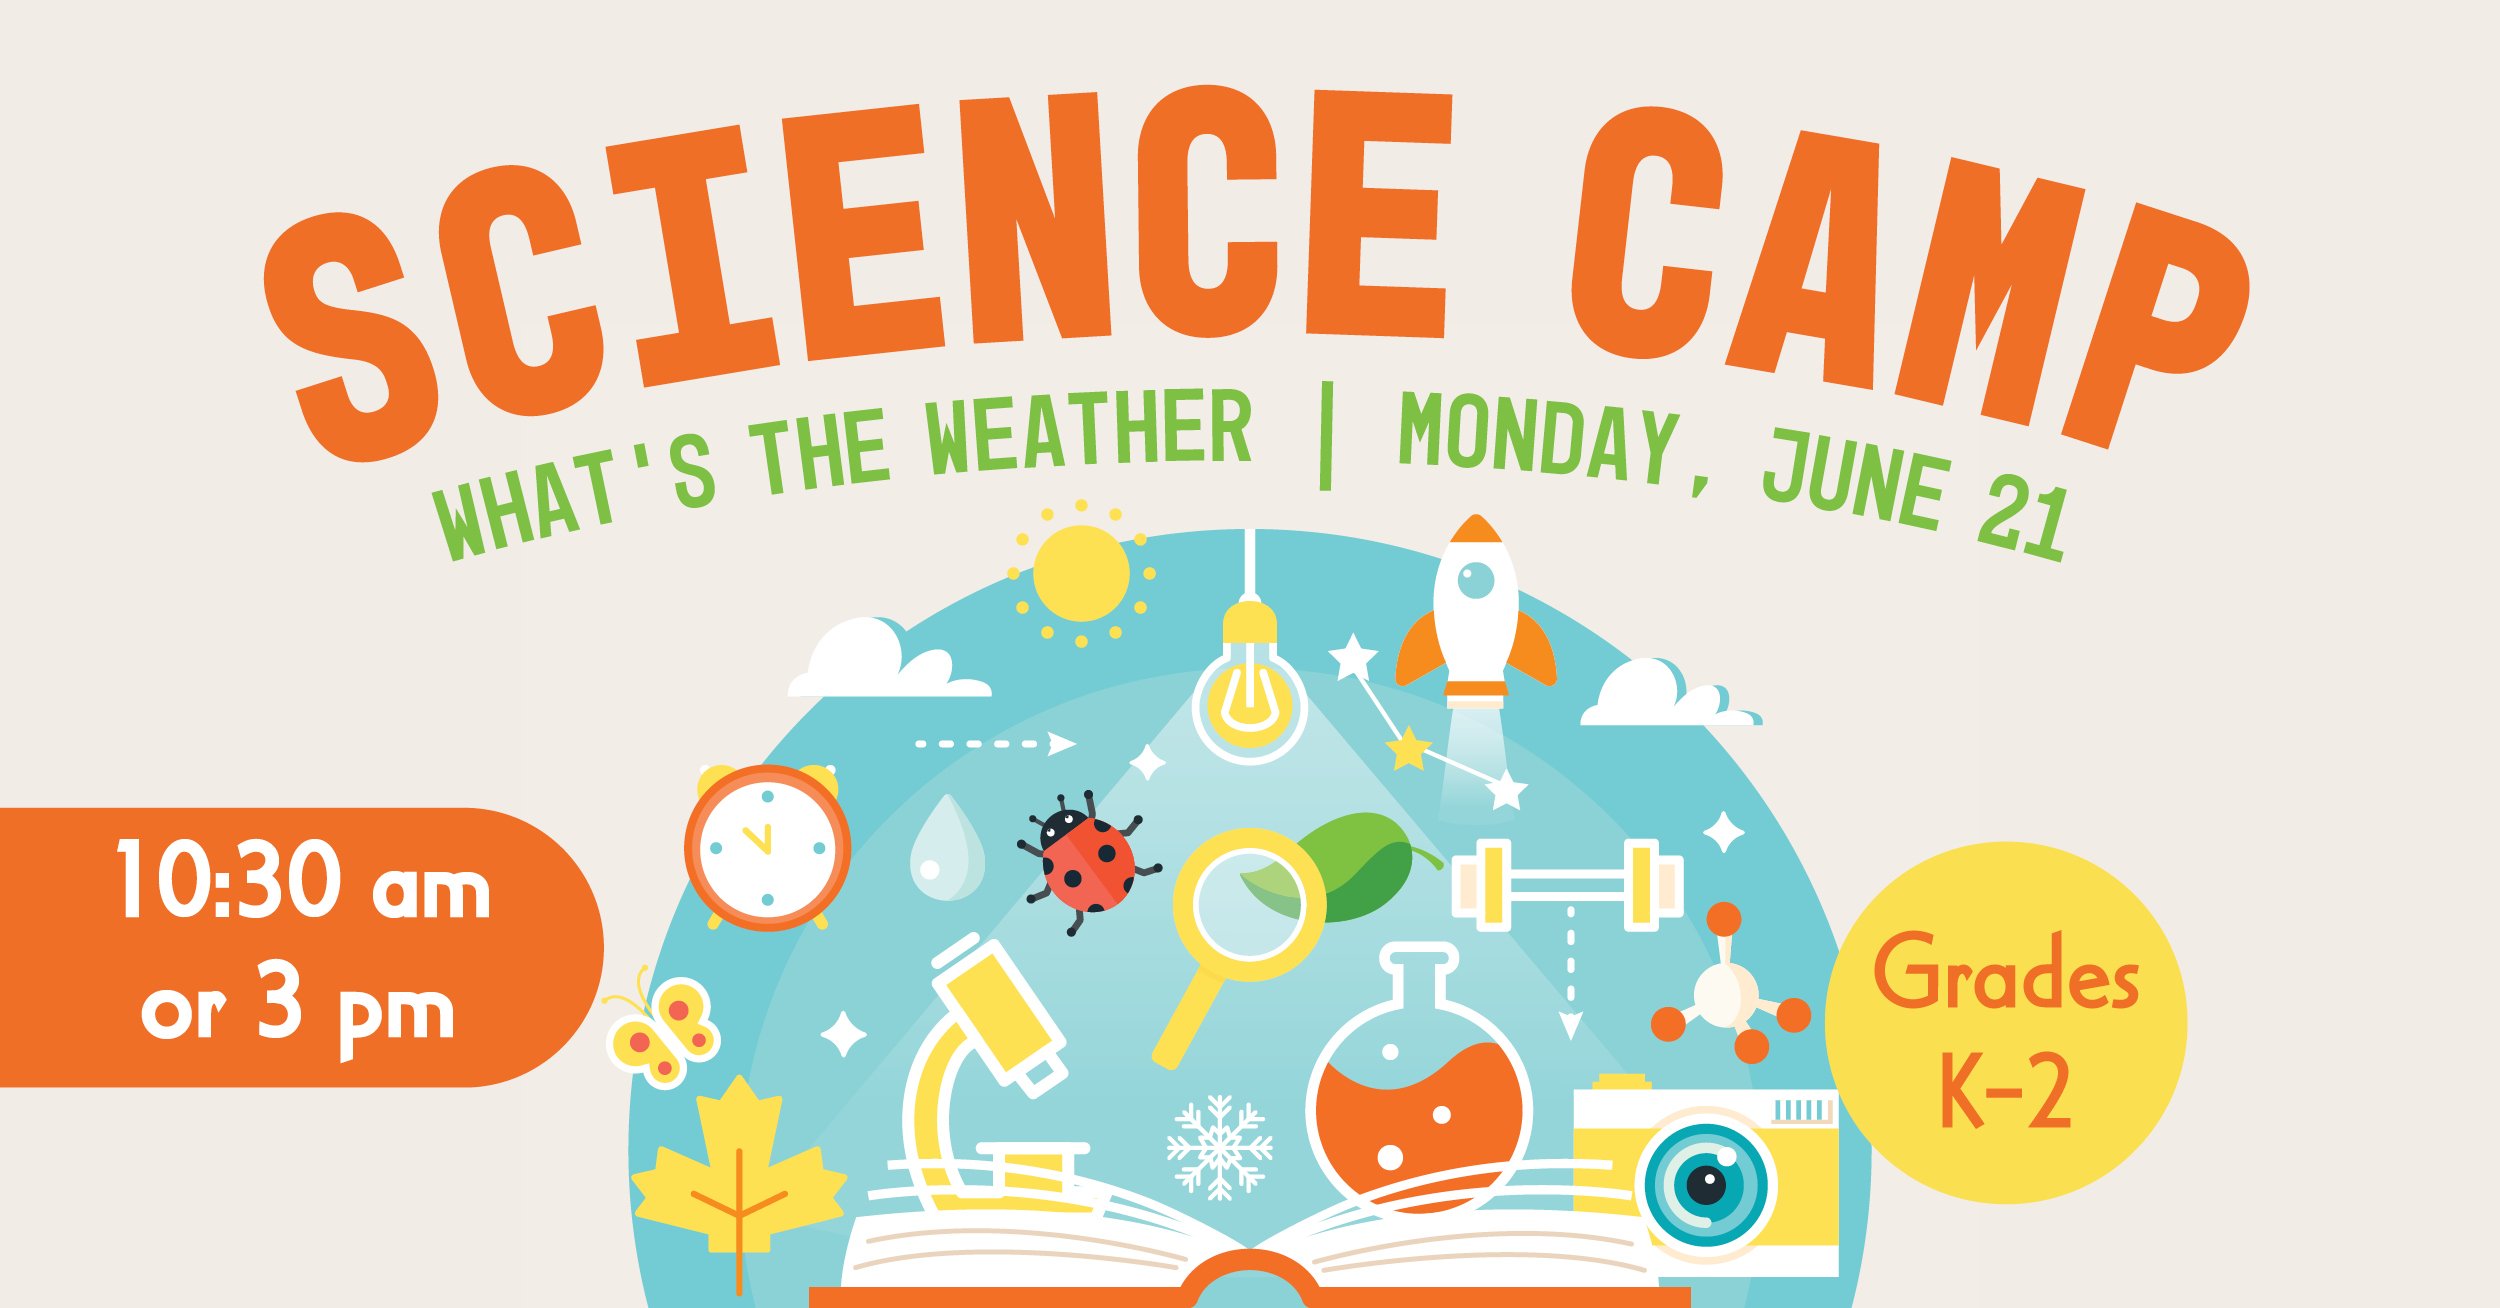 Science Camp: What's the weather? Monday, June 21 at 10:30am or 3pm. Grades Kindergarten to second grade.